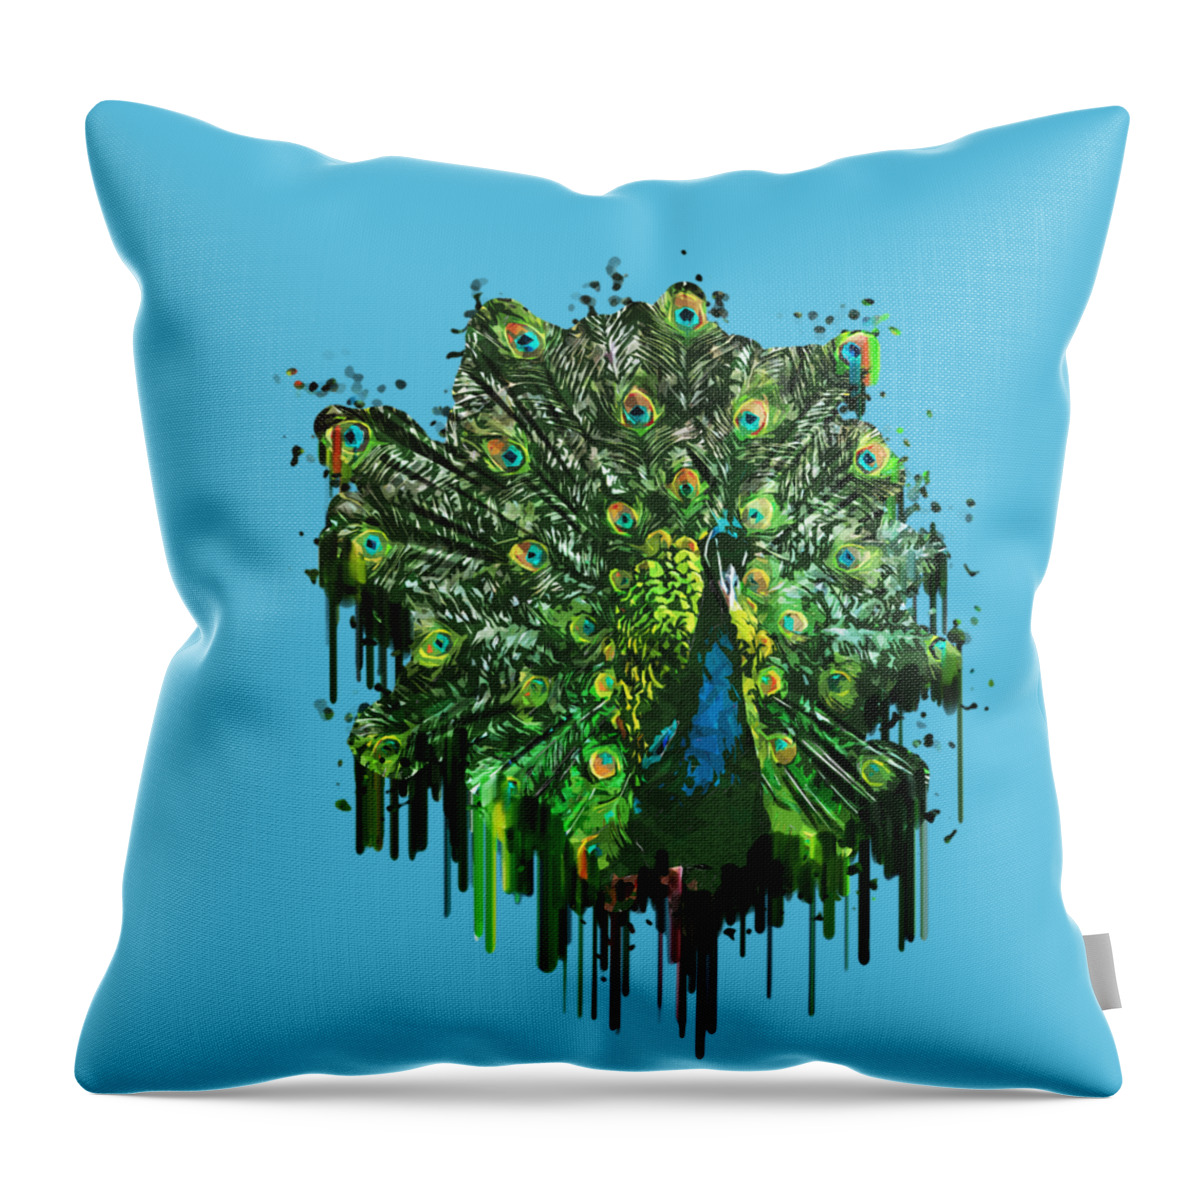 Abstract Peacock Throw Pillow featuring the painting Abstract Peacock Acrylic Digital Painting by Georgeta Blanaru